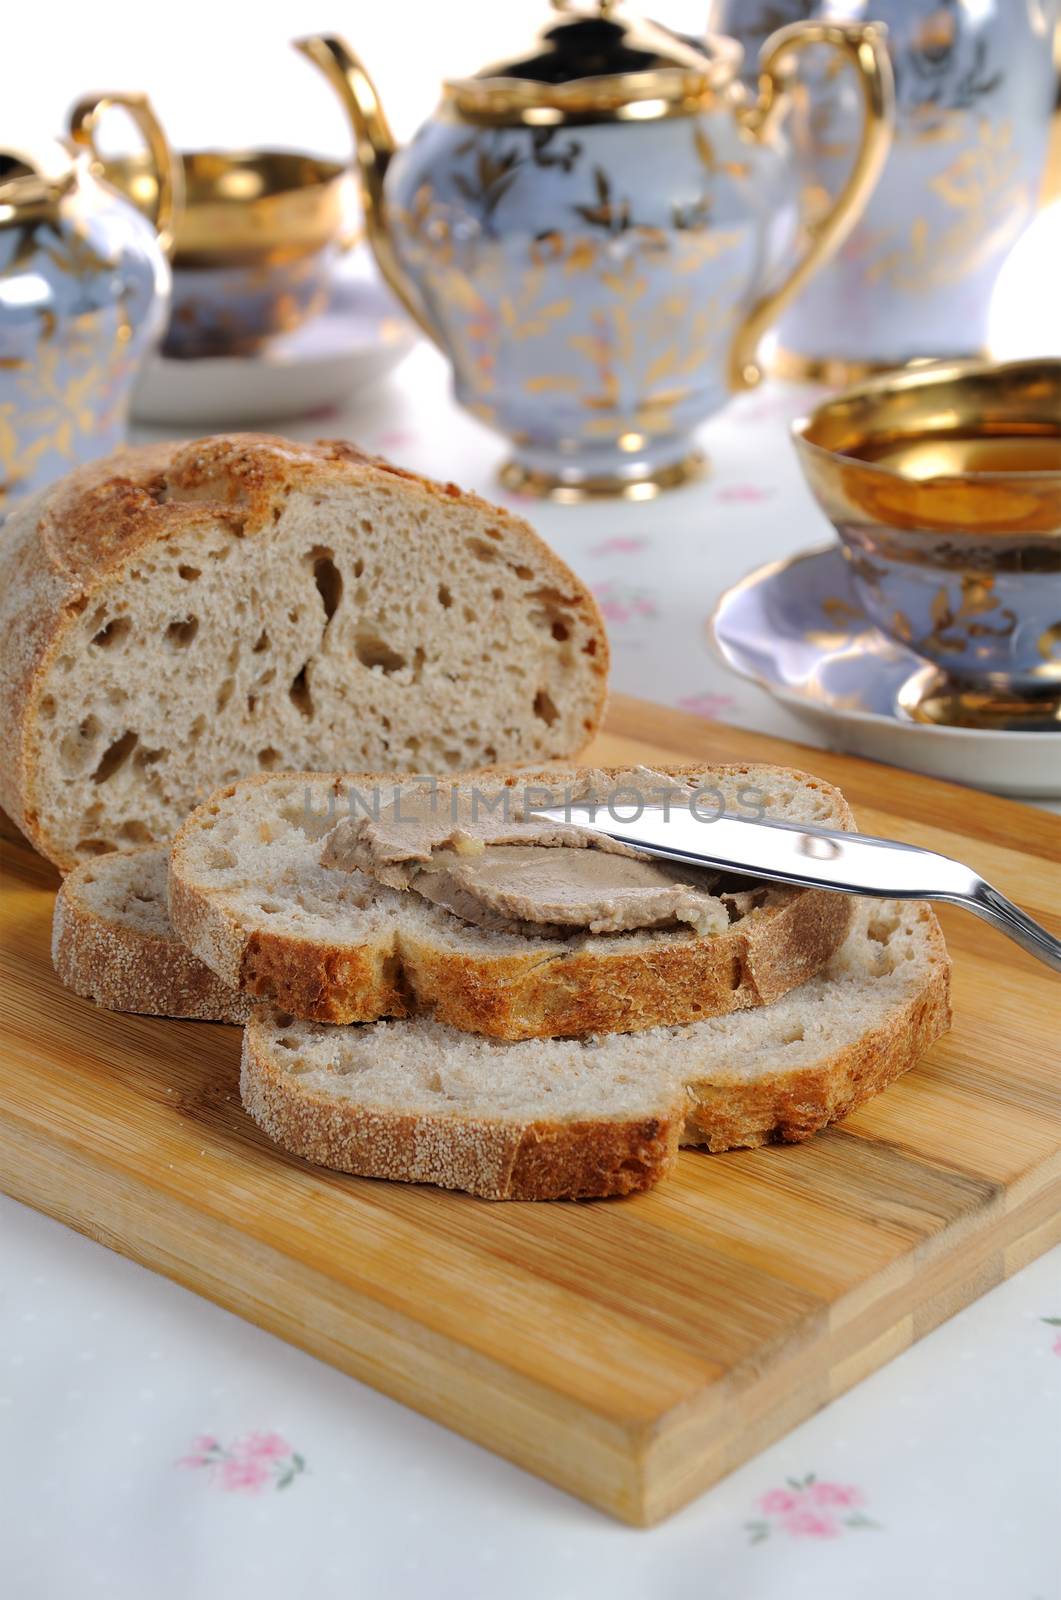 Chicken liver pate on a slice of bread with